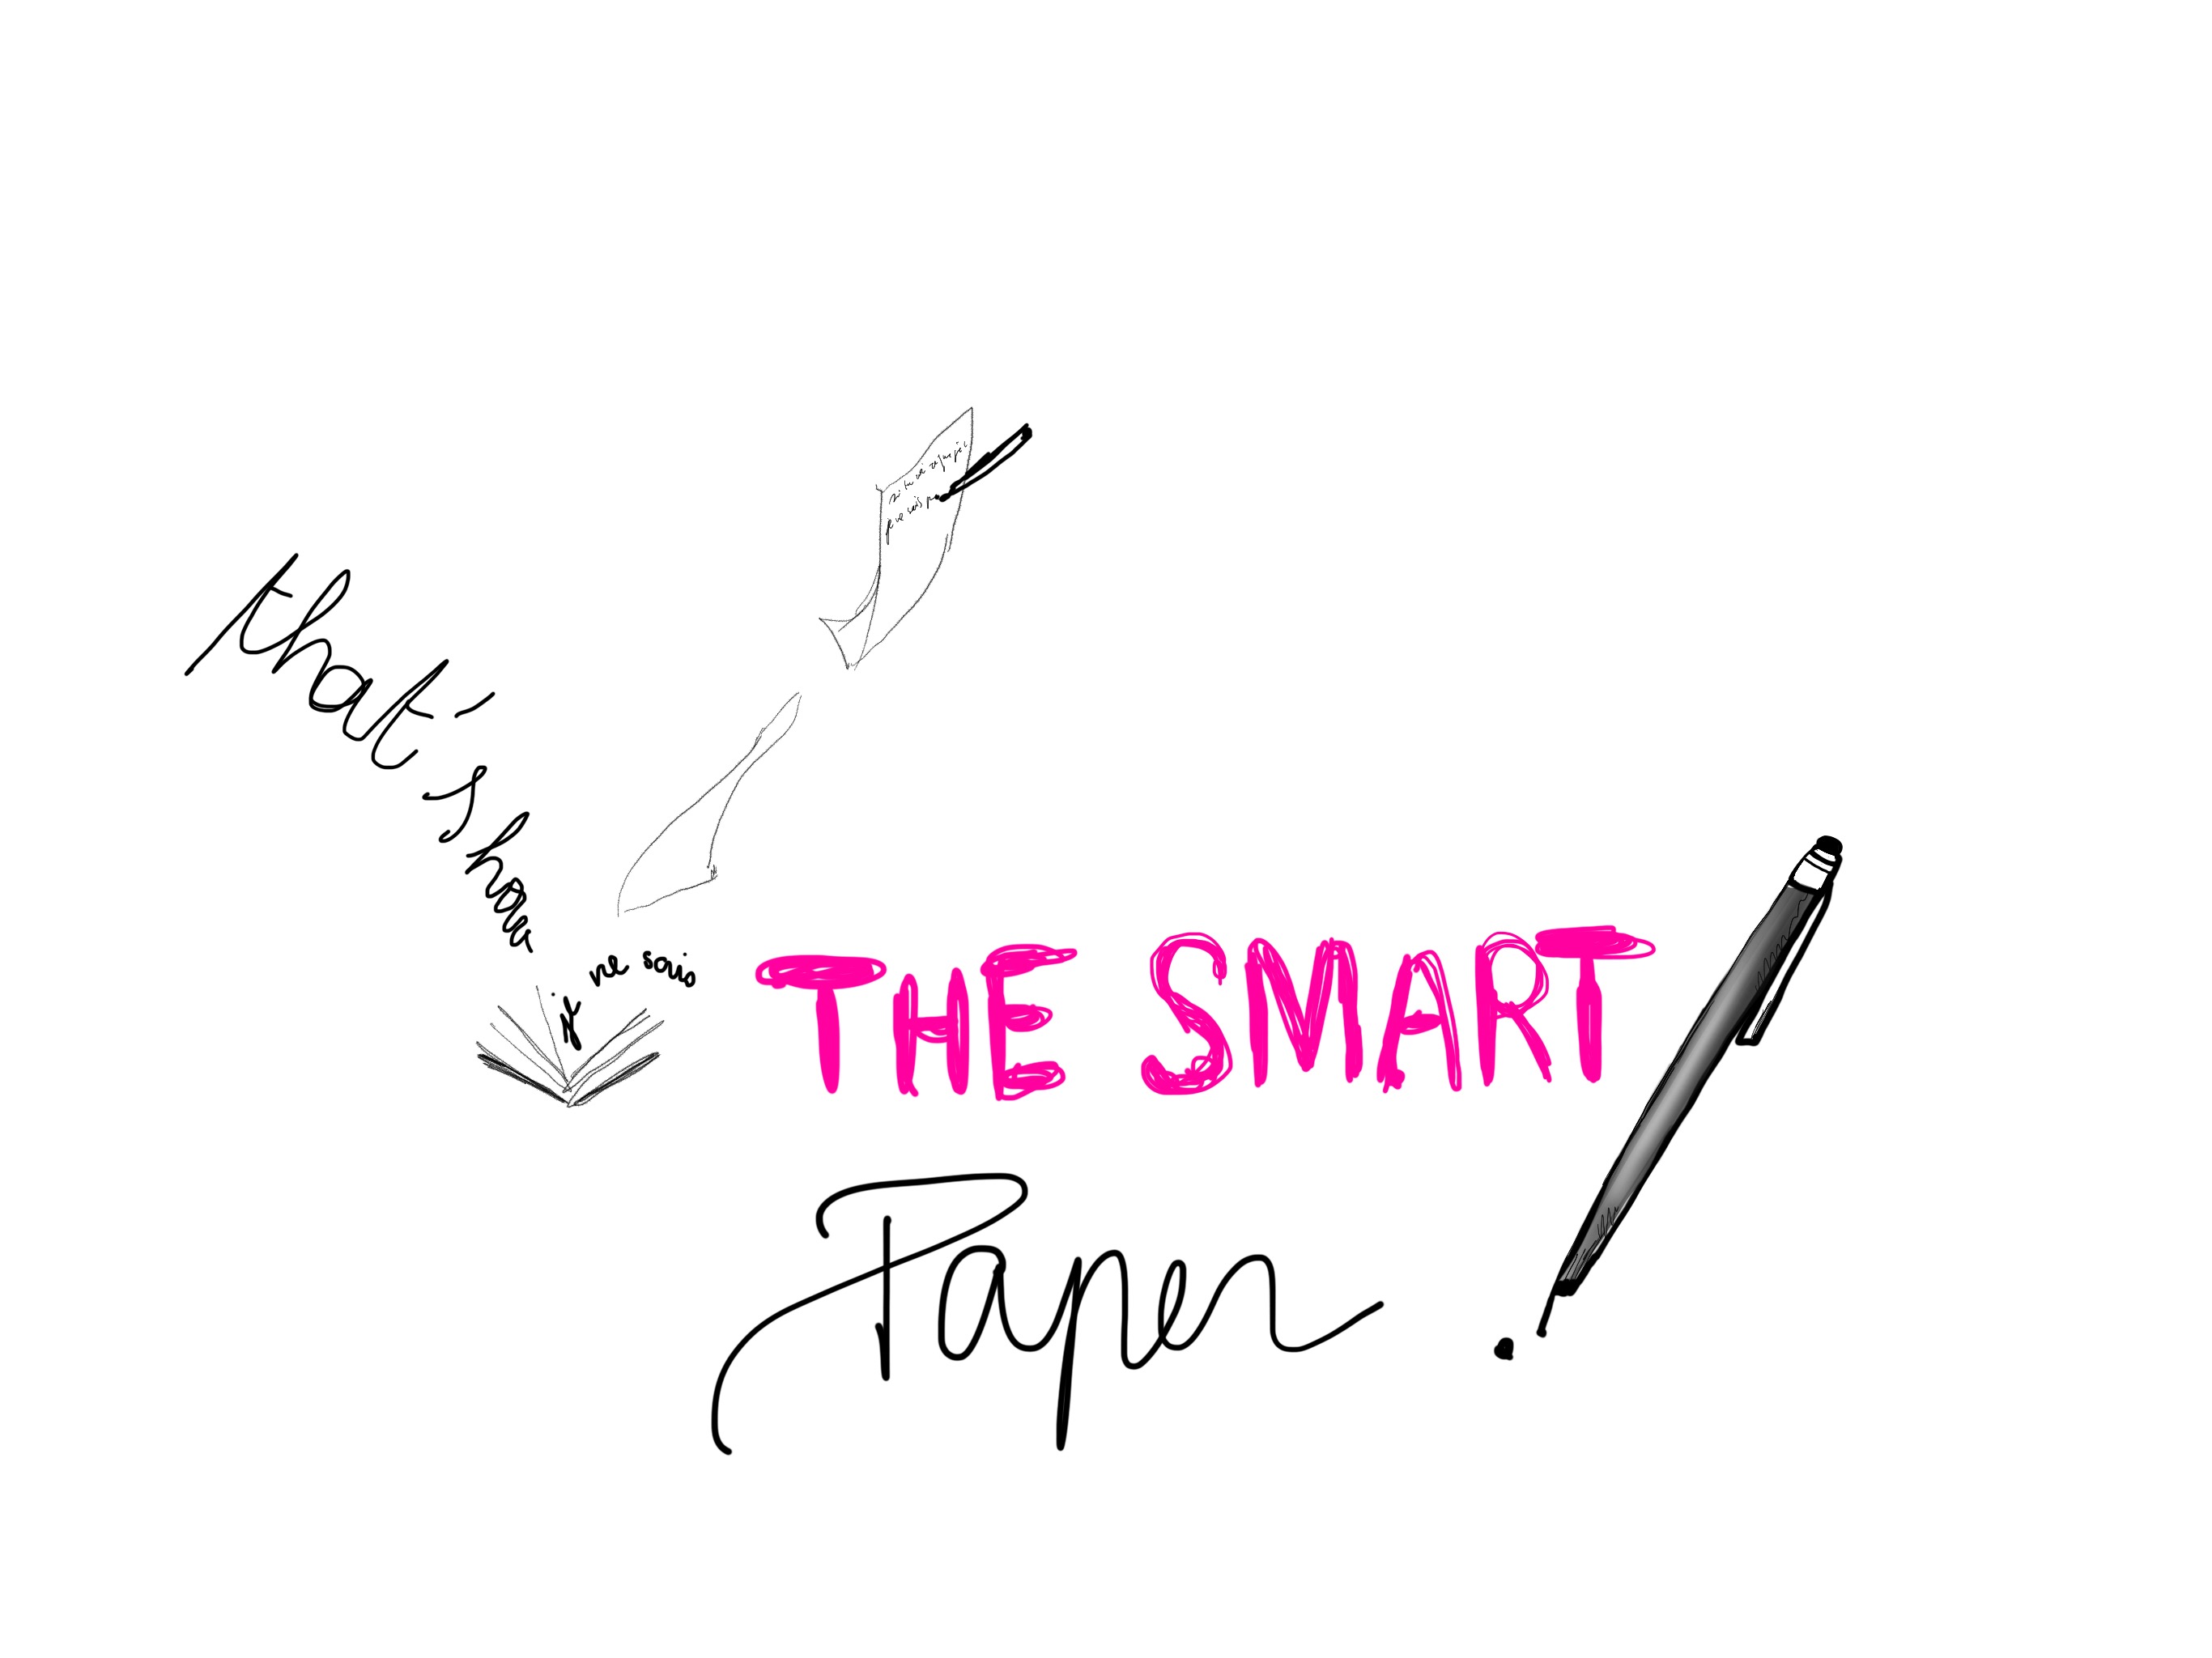 THE SMART PAPER